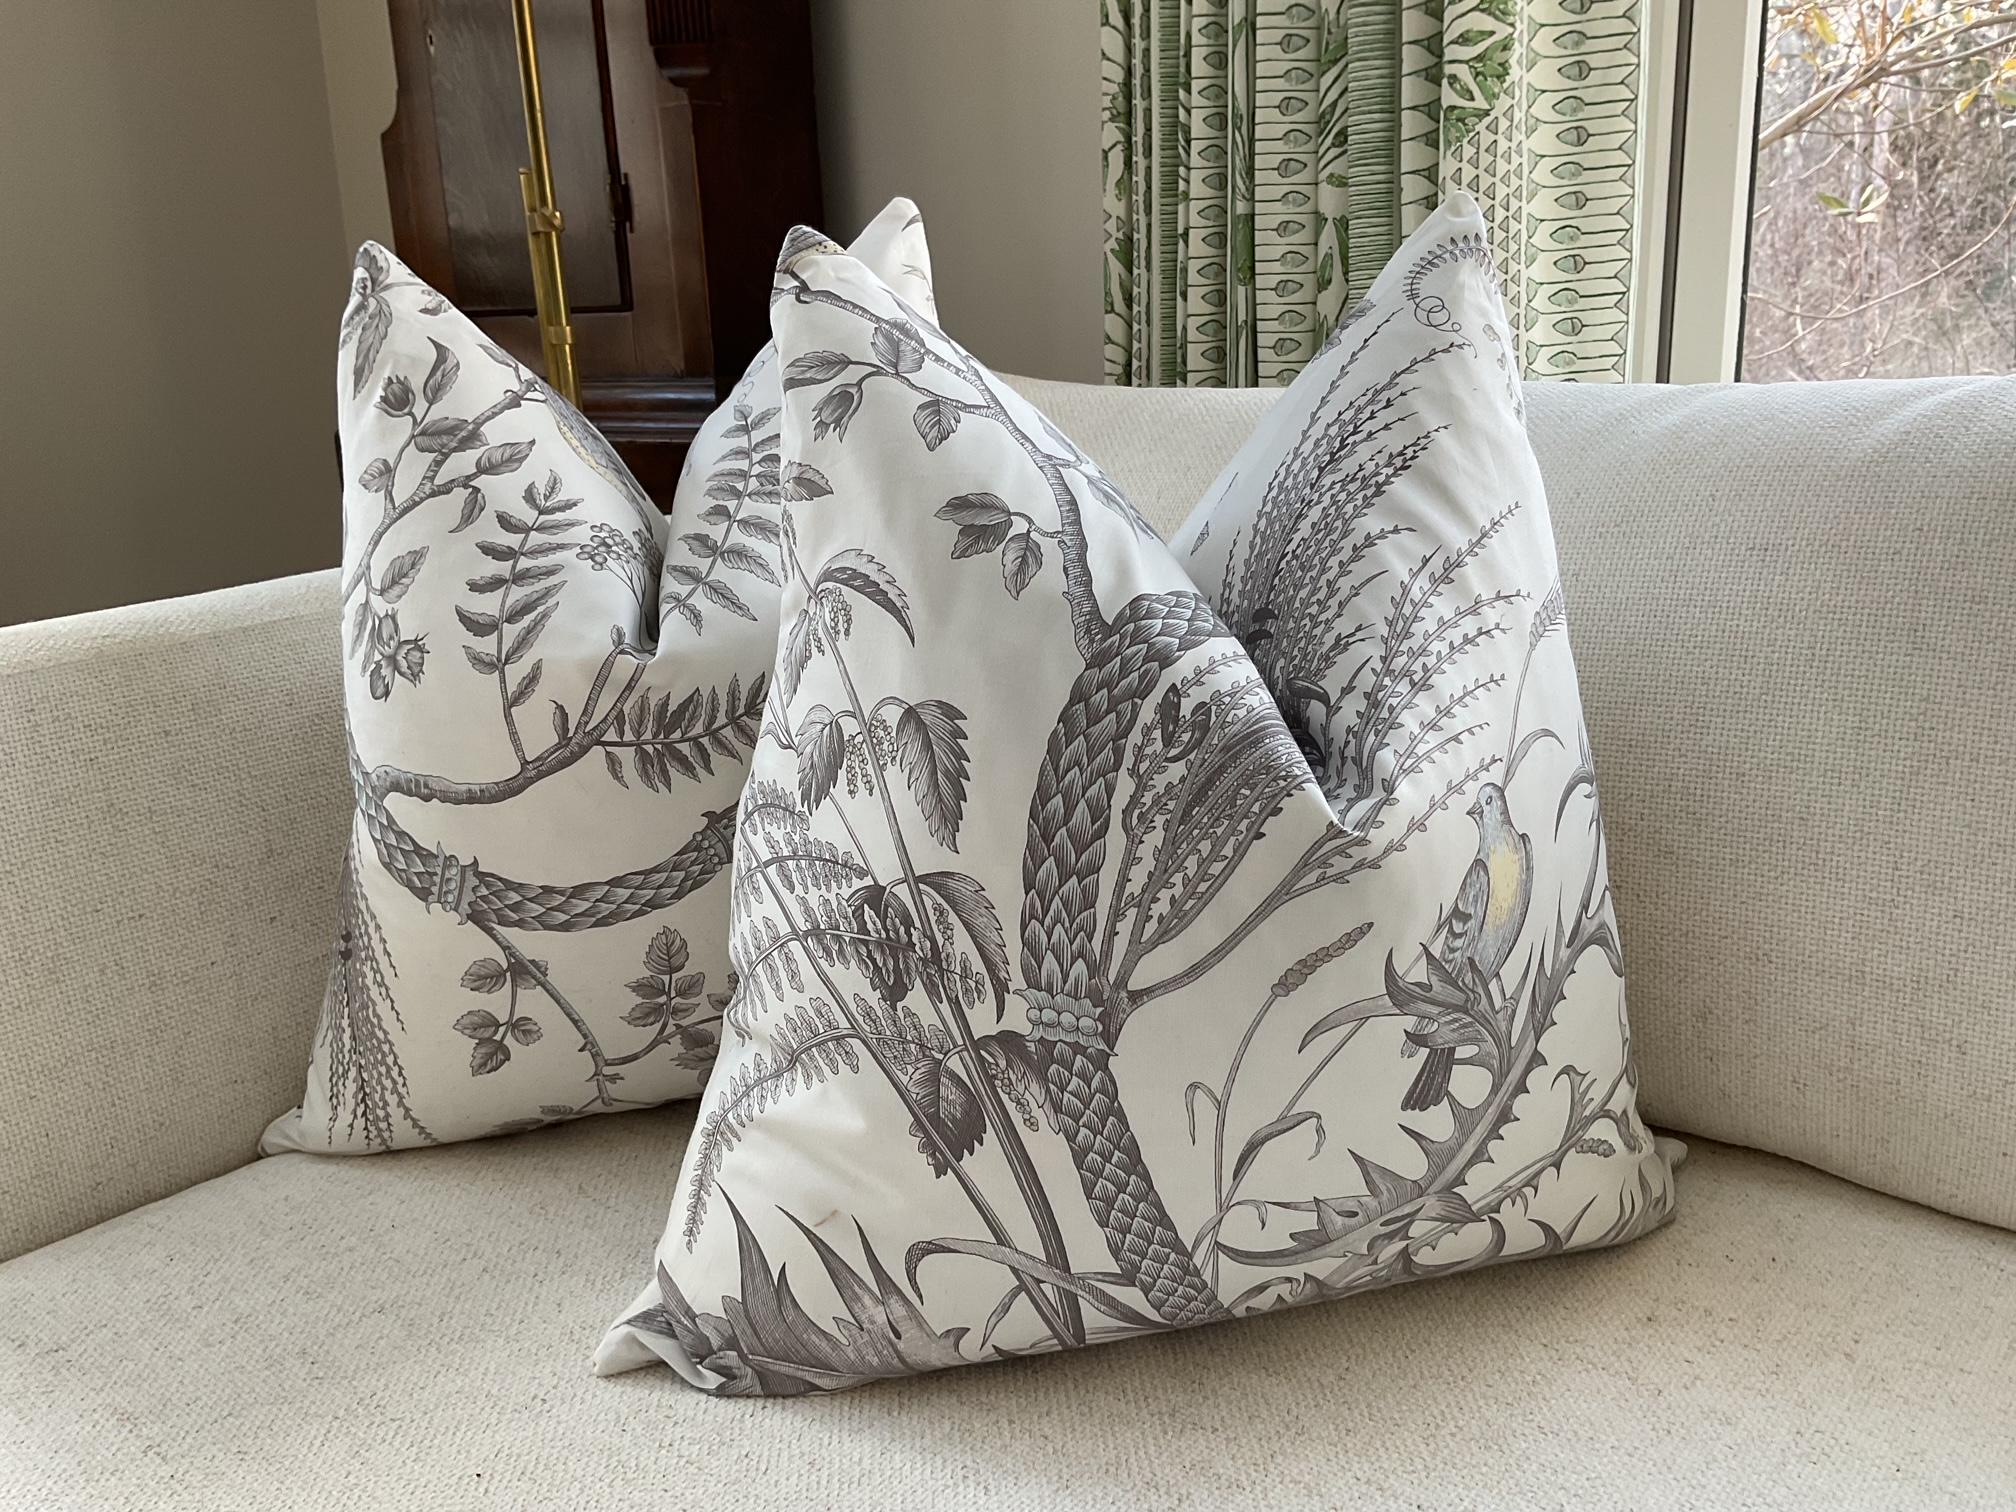 Made from a classic fabric from Brunschwig and Fils-Bird and Thistle is one of those designs that stands the test of time, as evidenced by its inclusion in The Winterthur Museum Collection. In gorgeous gray on ivory, the scene features vines and